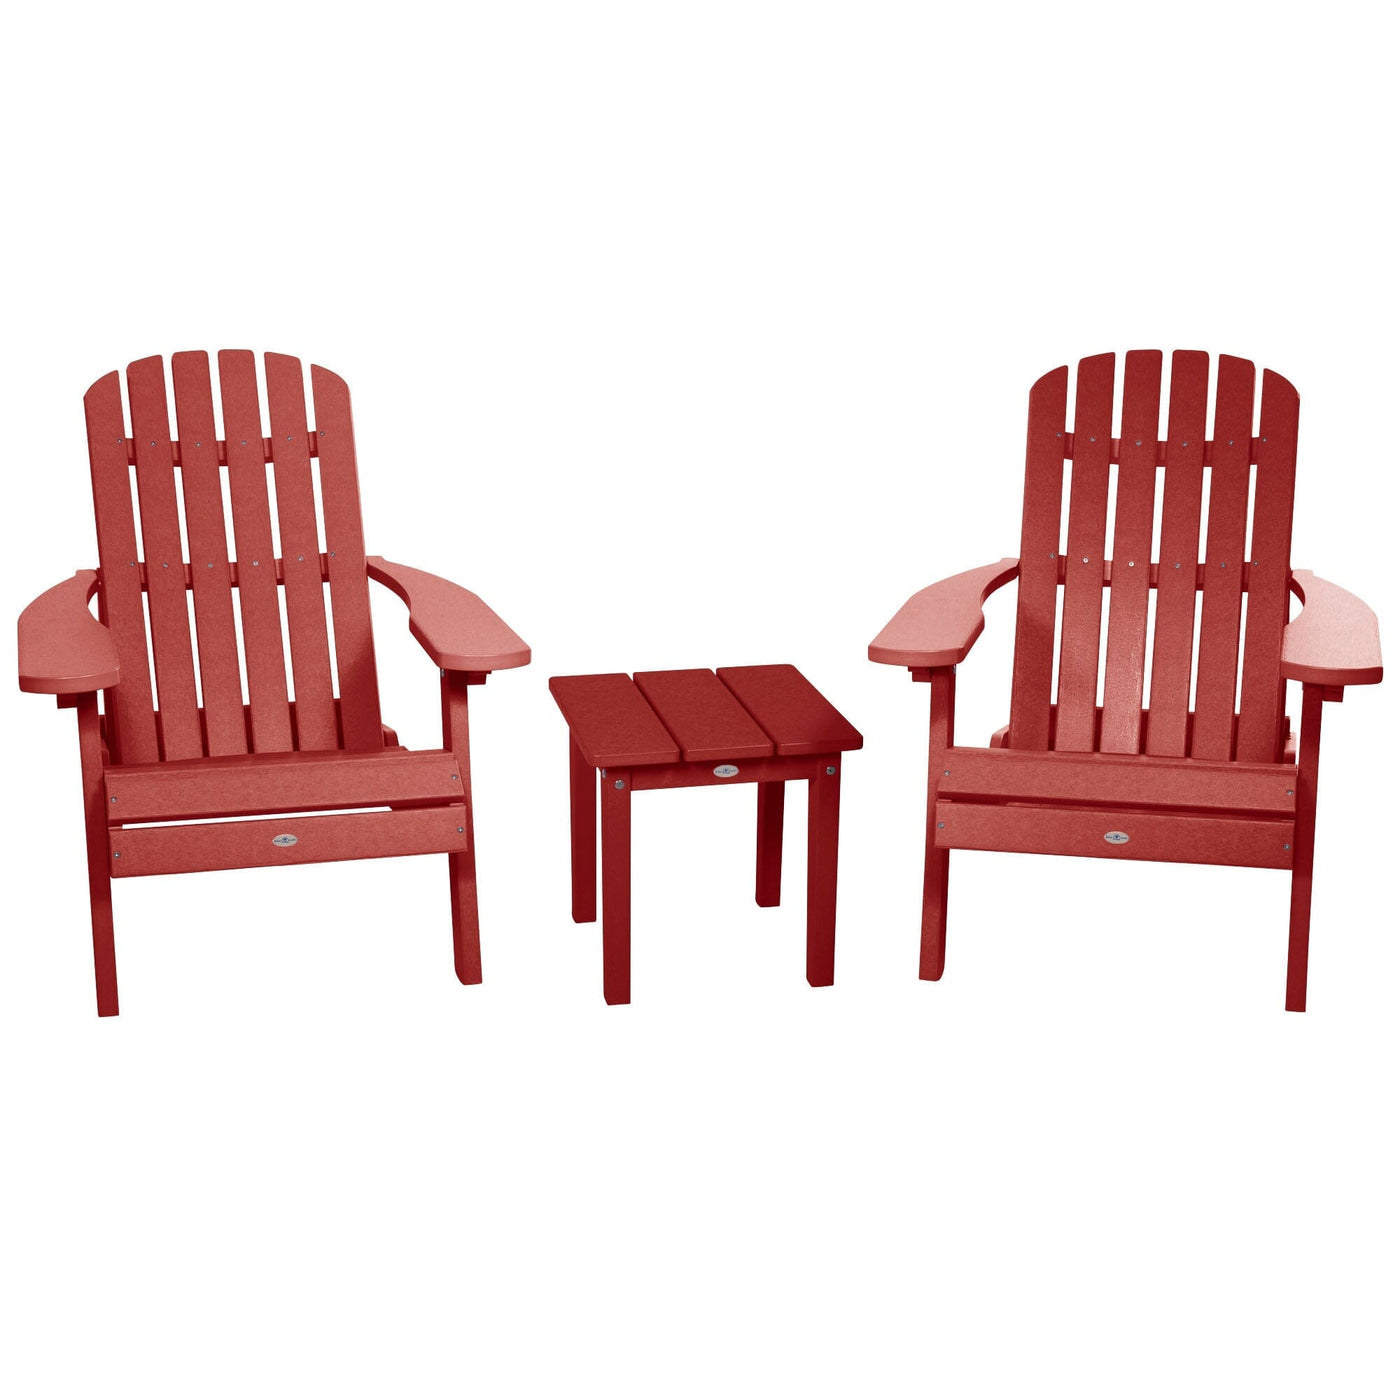 Two Cape Folding Adirondack Chairs and Side Table Set Kitted Set Bahia Verde Outdoors Boathouse Red 